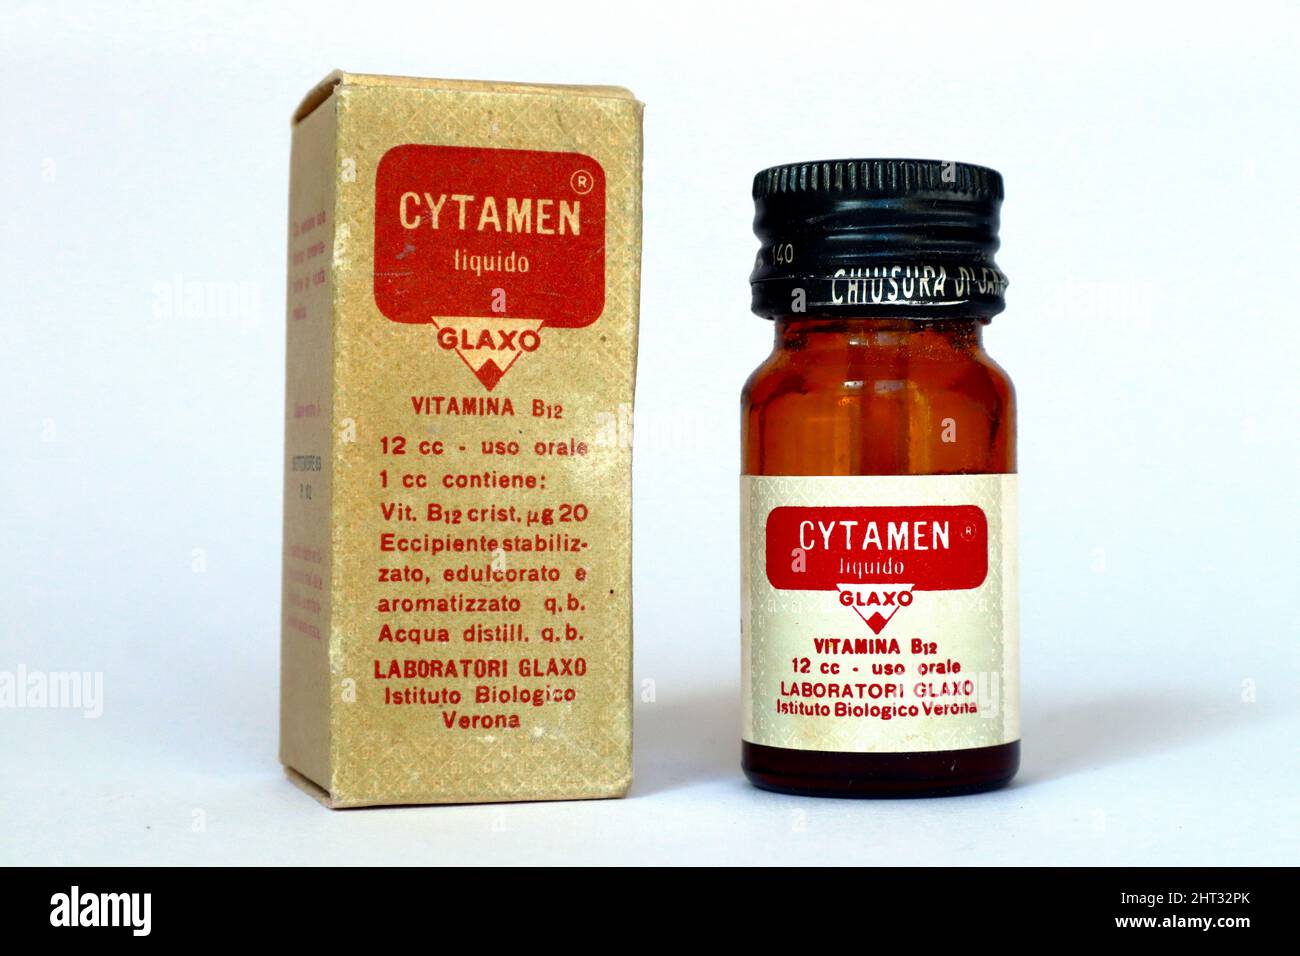 Vintage 1963 CYTAMEN GLAXO Dropper Bottle medicine with Vitamin B12 for the  treatment in retarded growth, anorexia. Laboratories GLAXO Verona (Italy  Stock Photo - Alamy